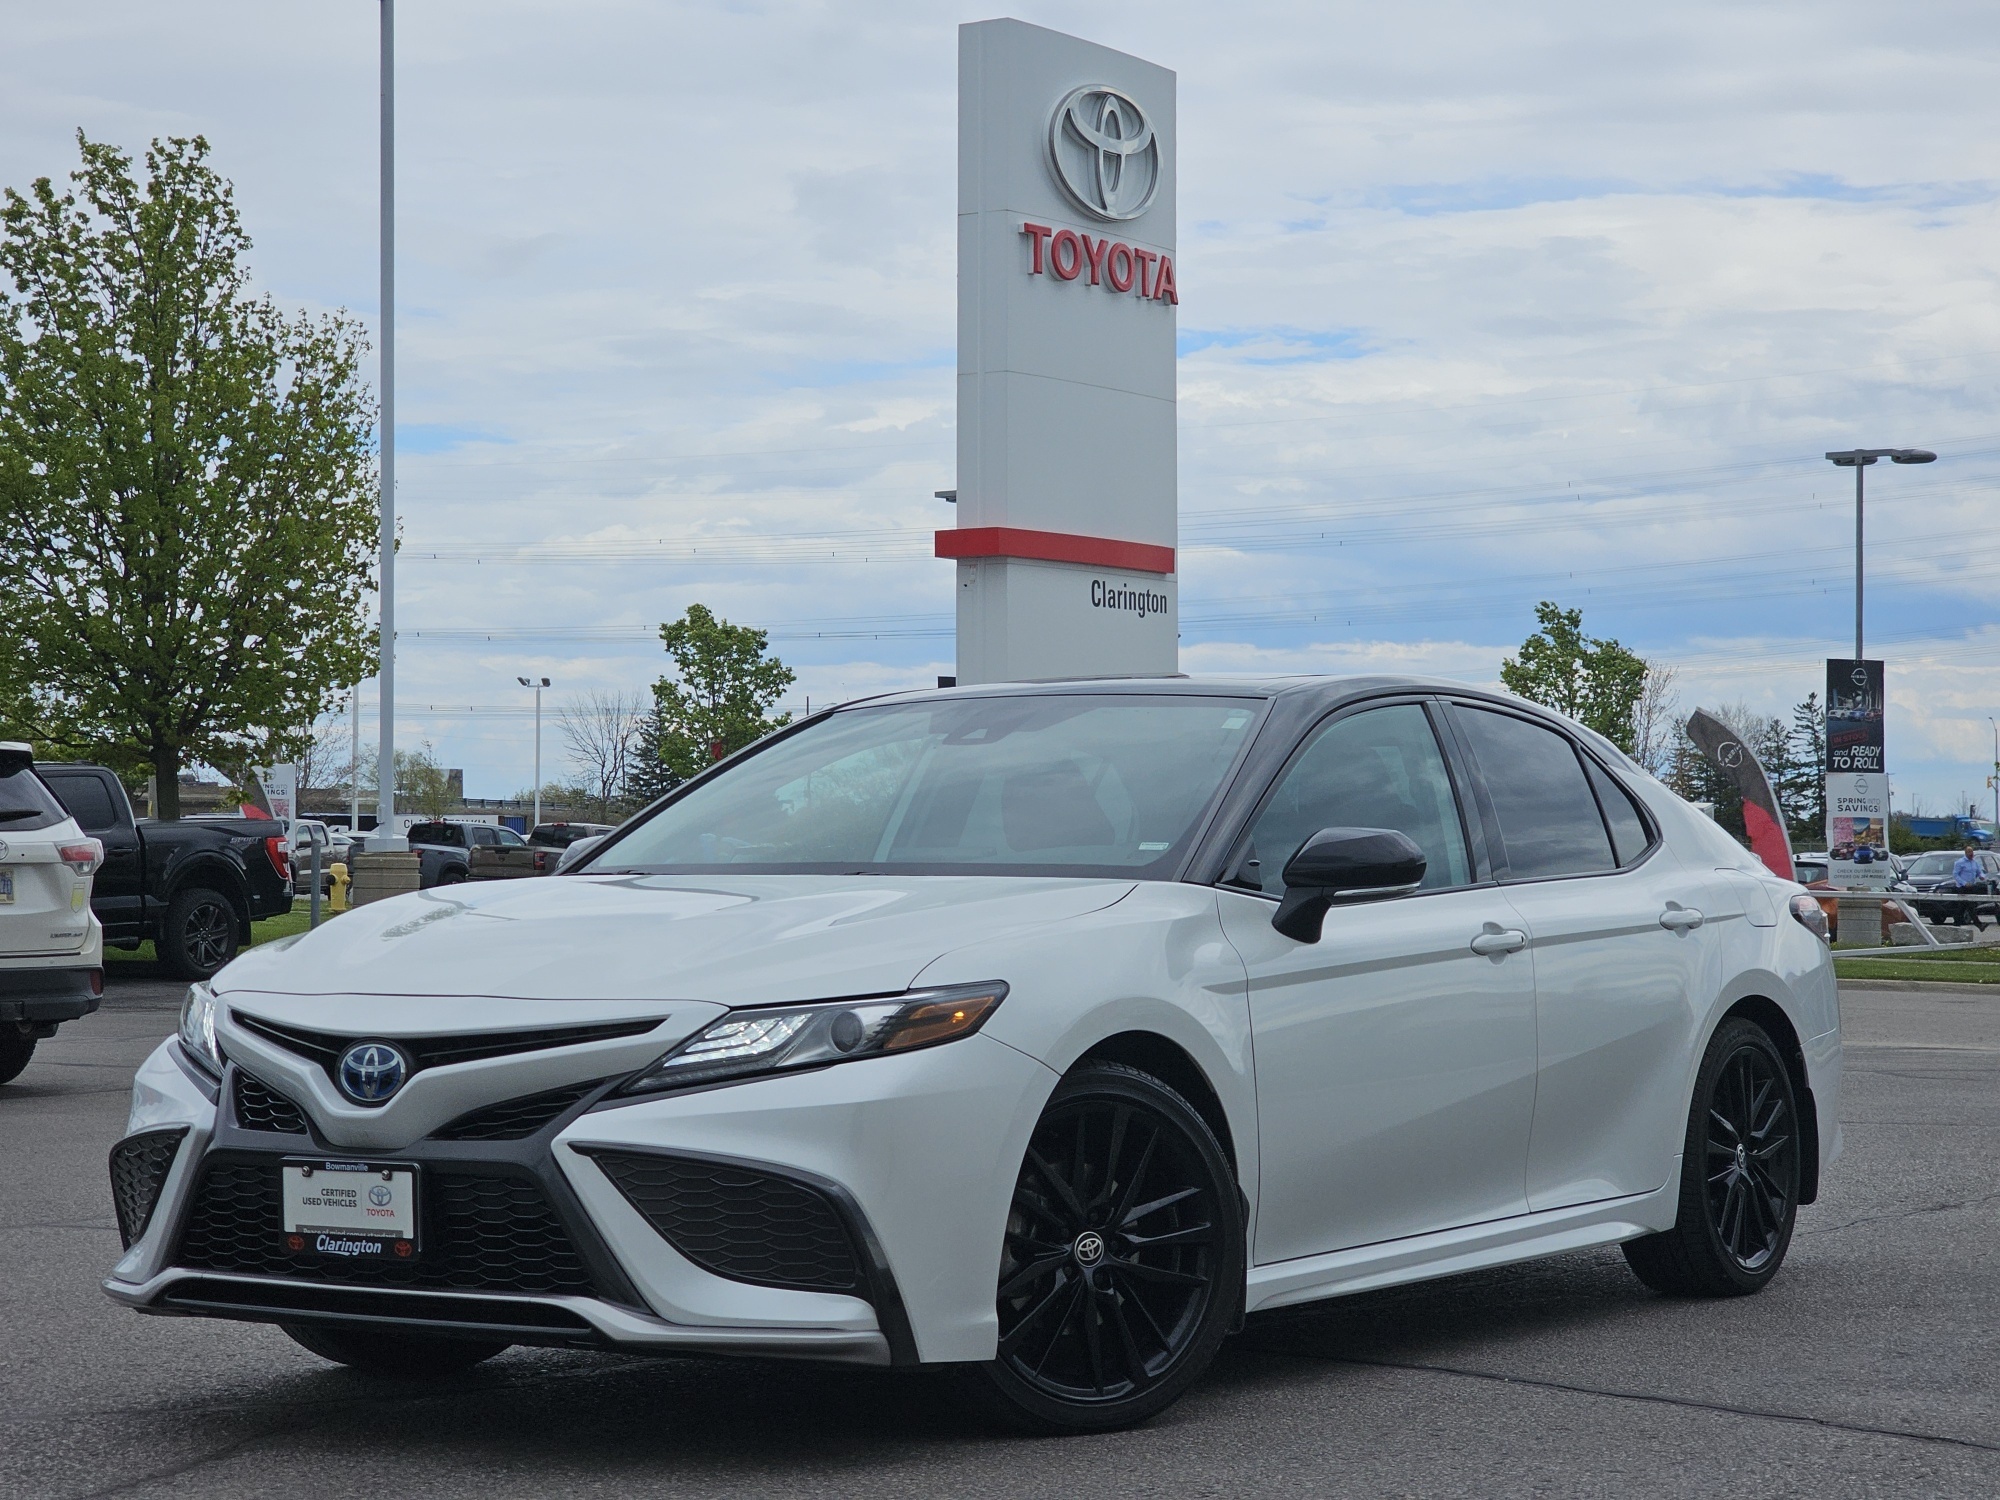 2022 Toyota Camry HYBRID|XSE|Red Leather|Roof|Alloys|Fuel Saver!